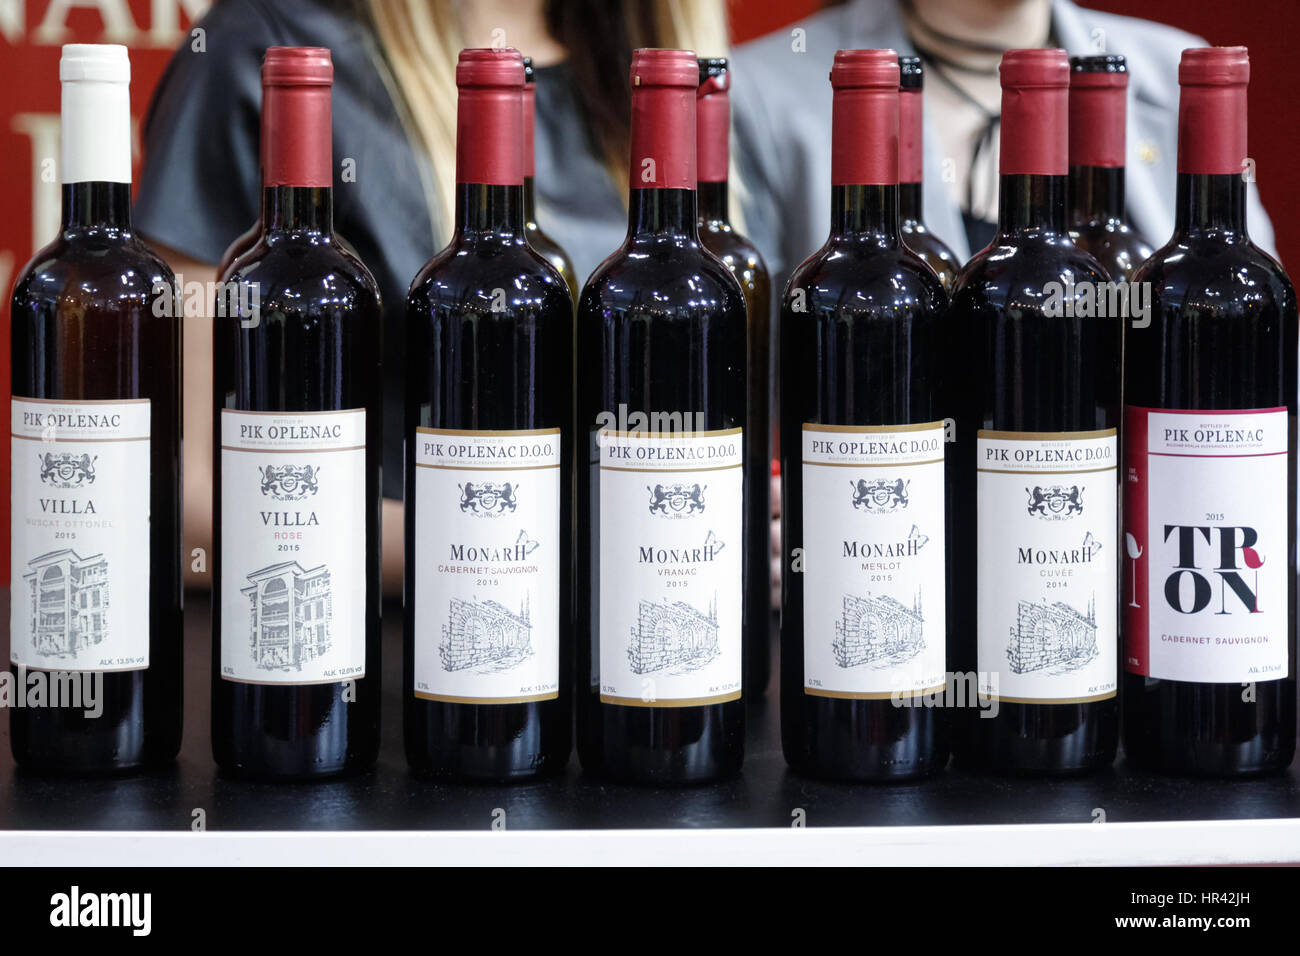 BELGRADE, SERBIA - FEBRUARY 25, 2017: Bottles of red and white wine from Serbia on display at a stand of the 2017 Tourism fair of Belgrade  Pictures o Stock Photo